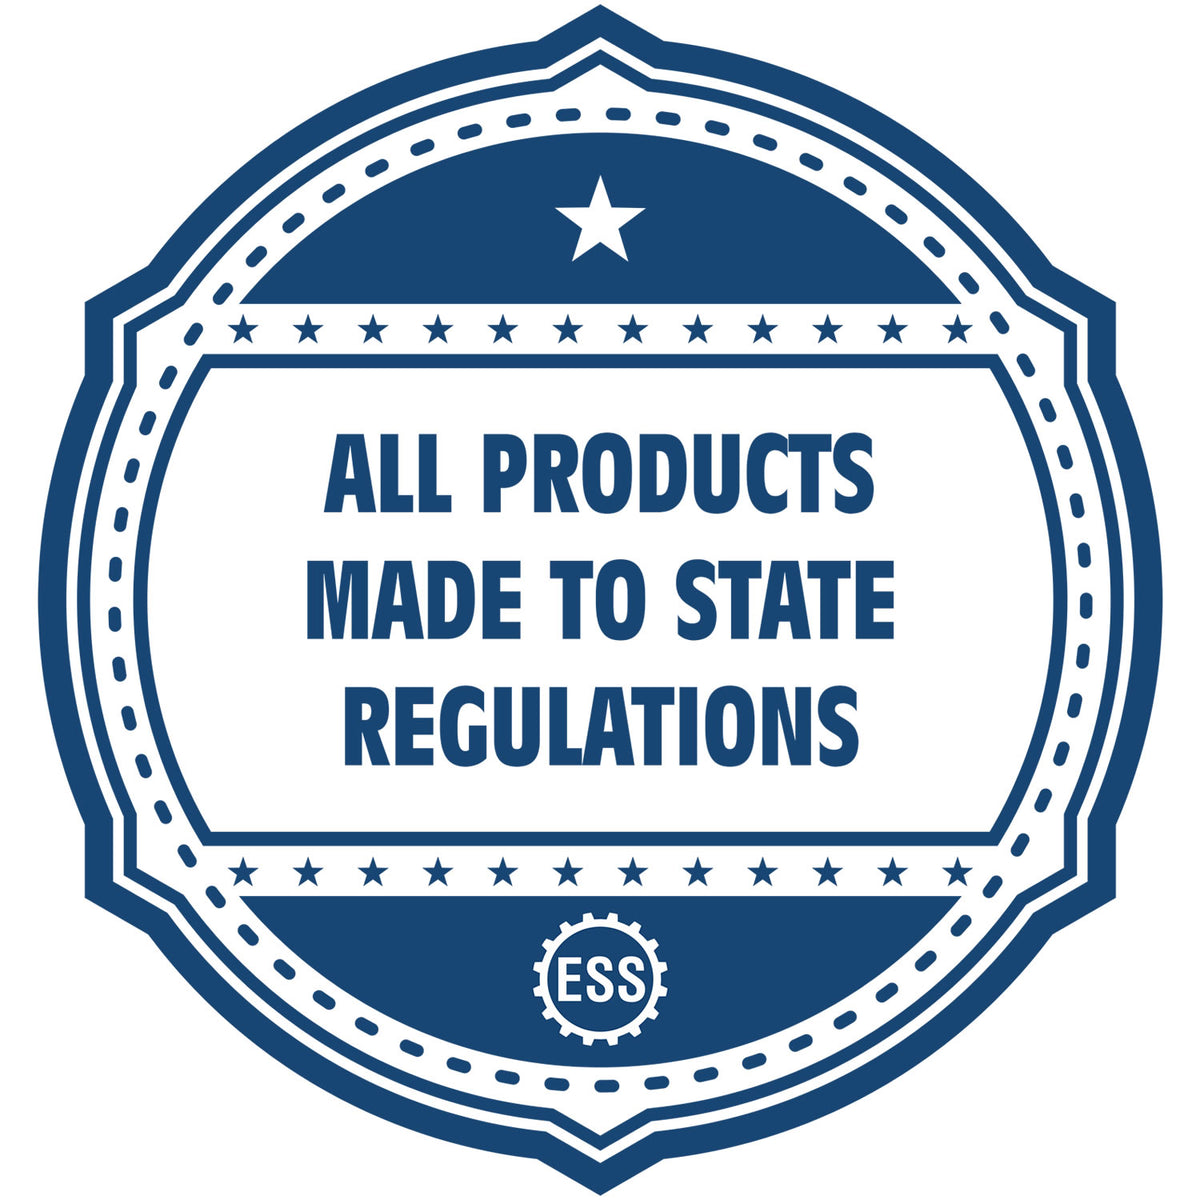 An icon or badge element for the Digital Kentucky PE Stamp and Electronic Seal for Kentucky Engineer showing that this product is made in compliance with state regulations.